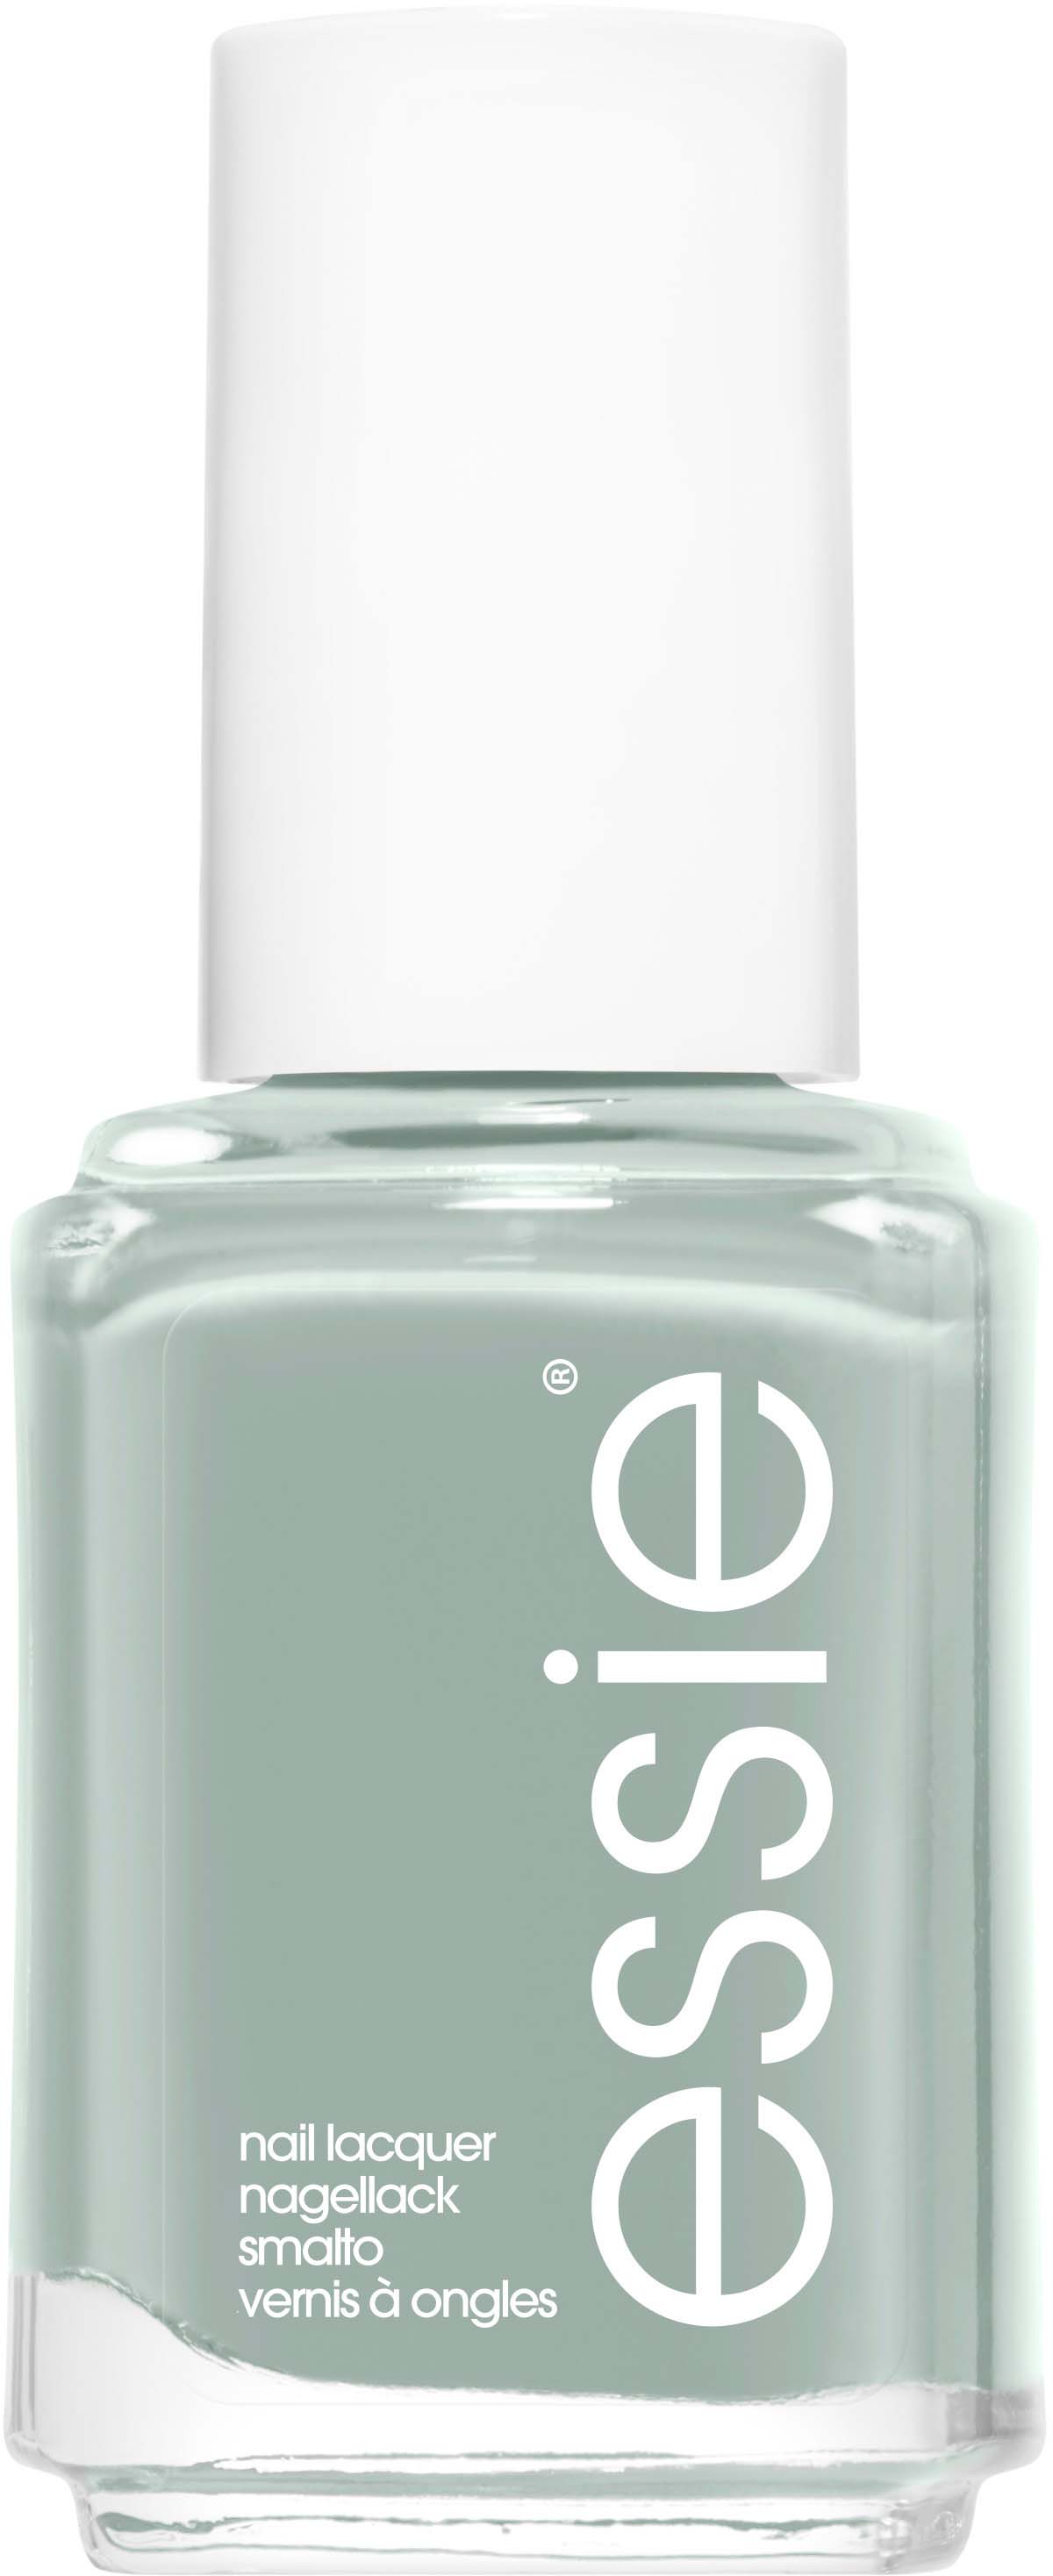 Essie Nail Lacquer Maximillian Strasse Her 252